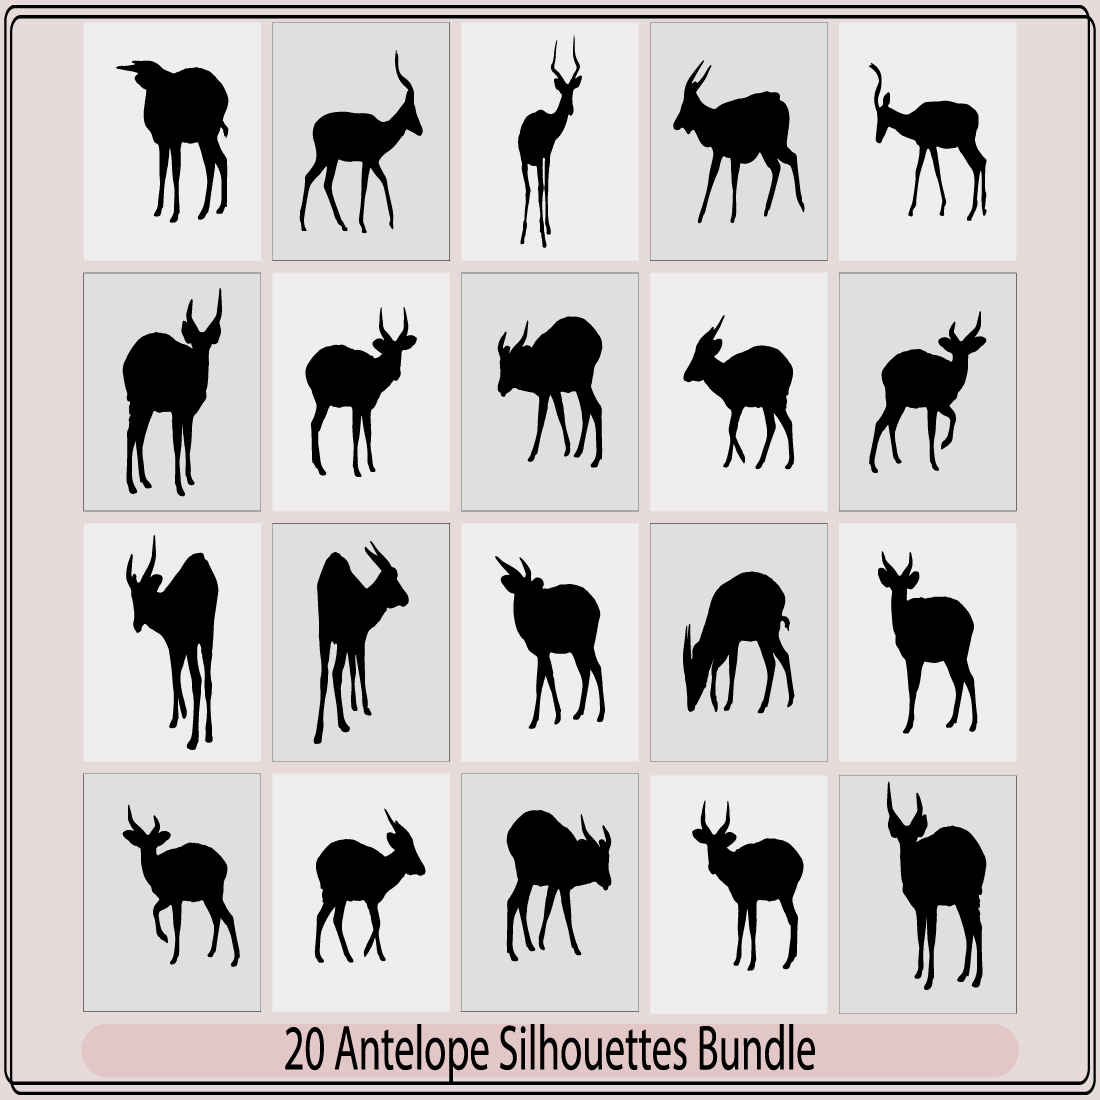 African antelope silhouette,Vector jump antelope silhouette,Black silhouette of an antelope,silhouettes of running impala antelopes, cover image.